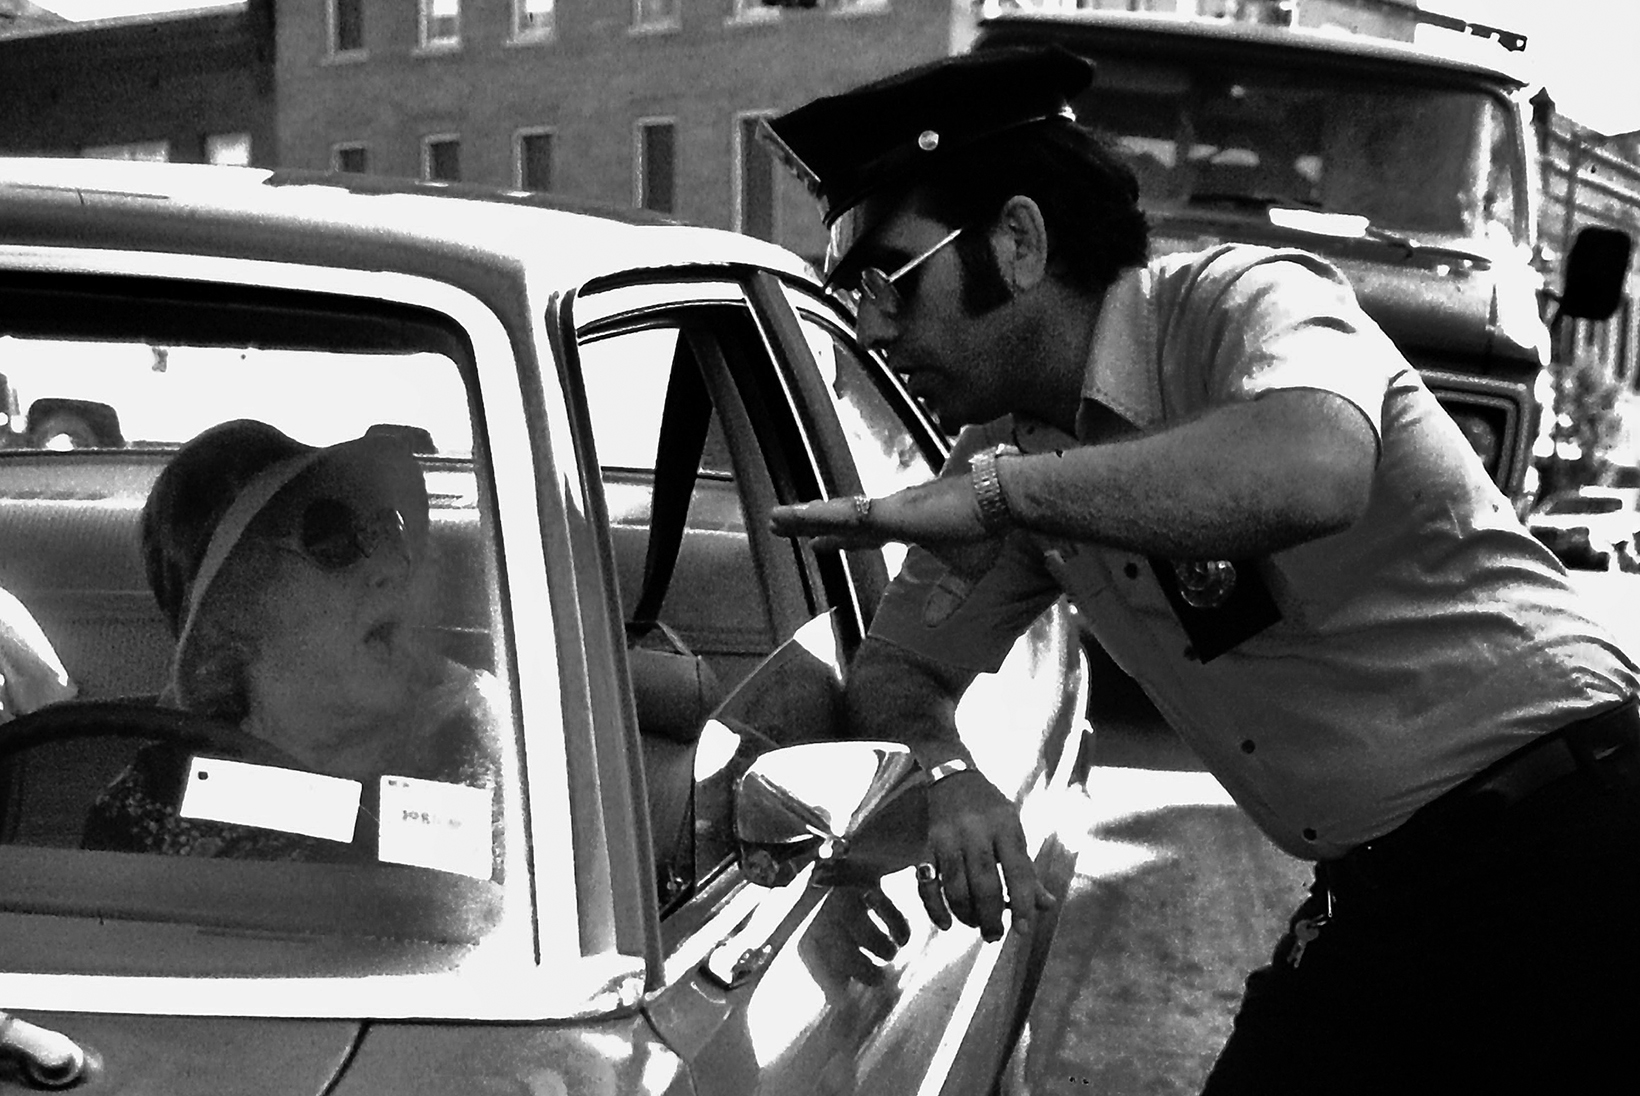 A police officer with sideburns and dressed from the 1970s speaks with an older woman in her car through the driver’s side window as he leans against the car door.